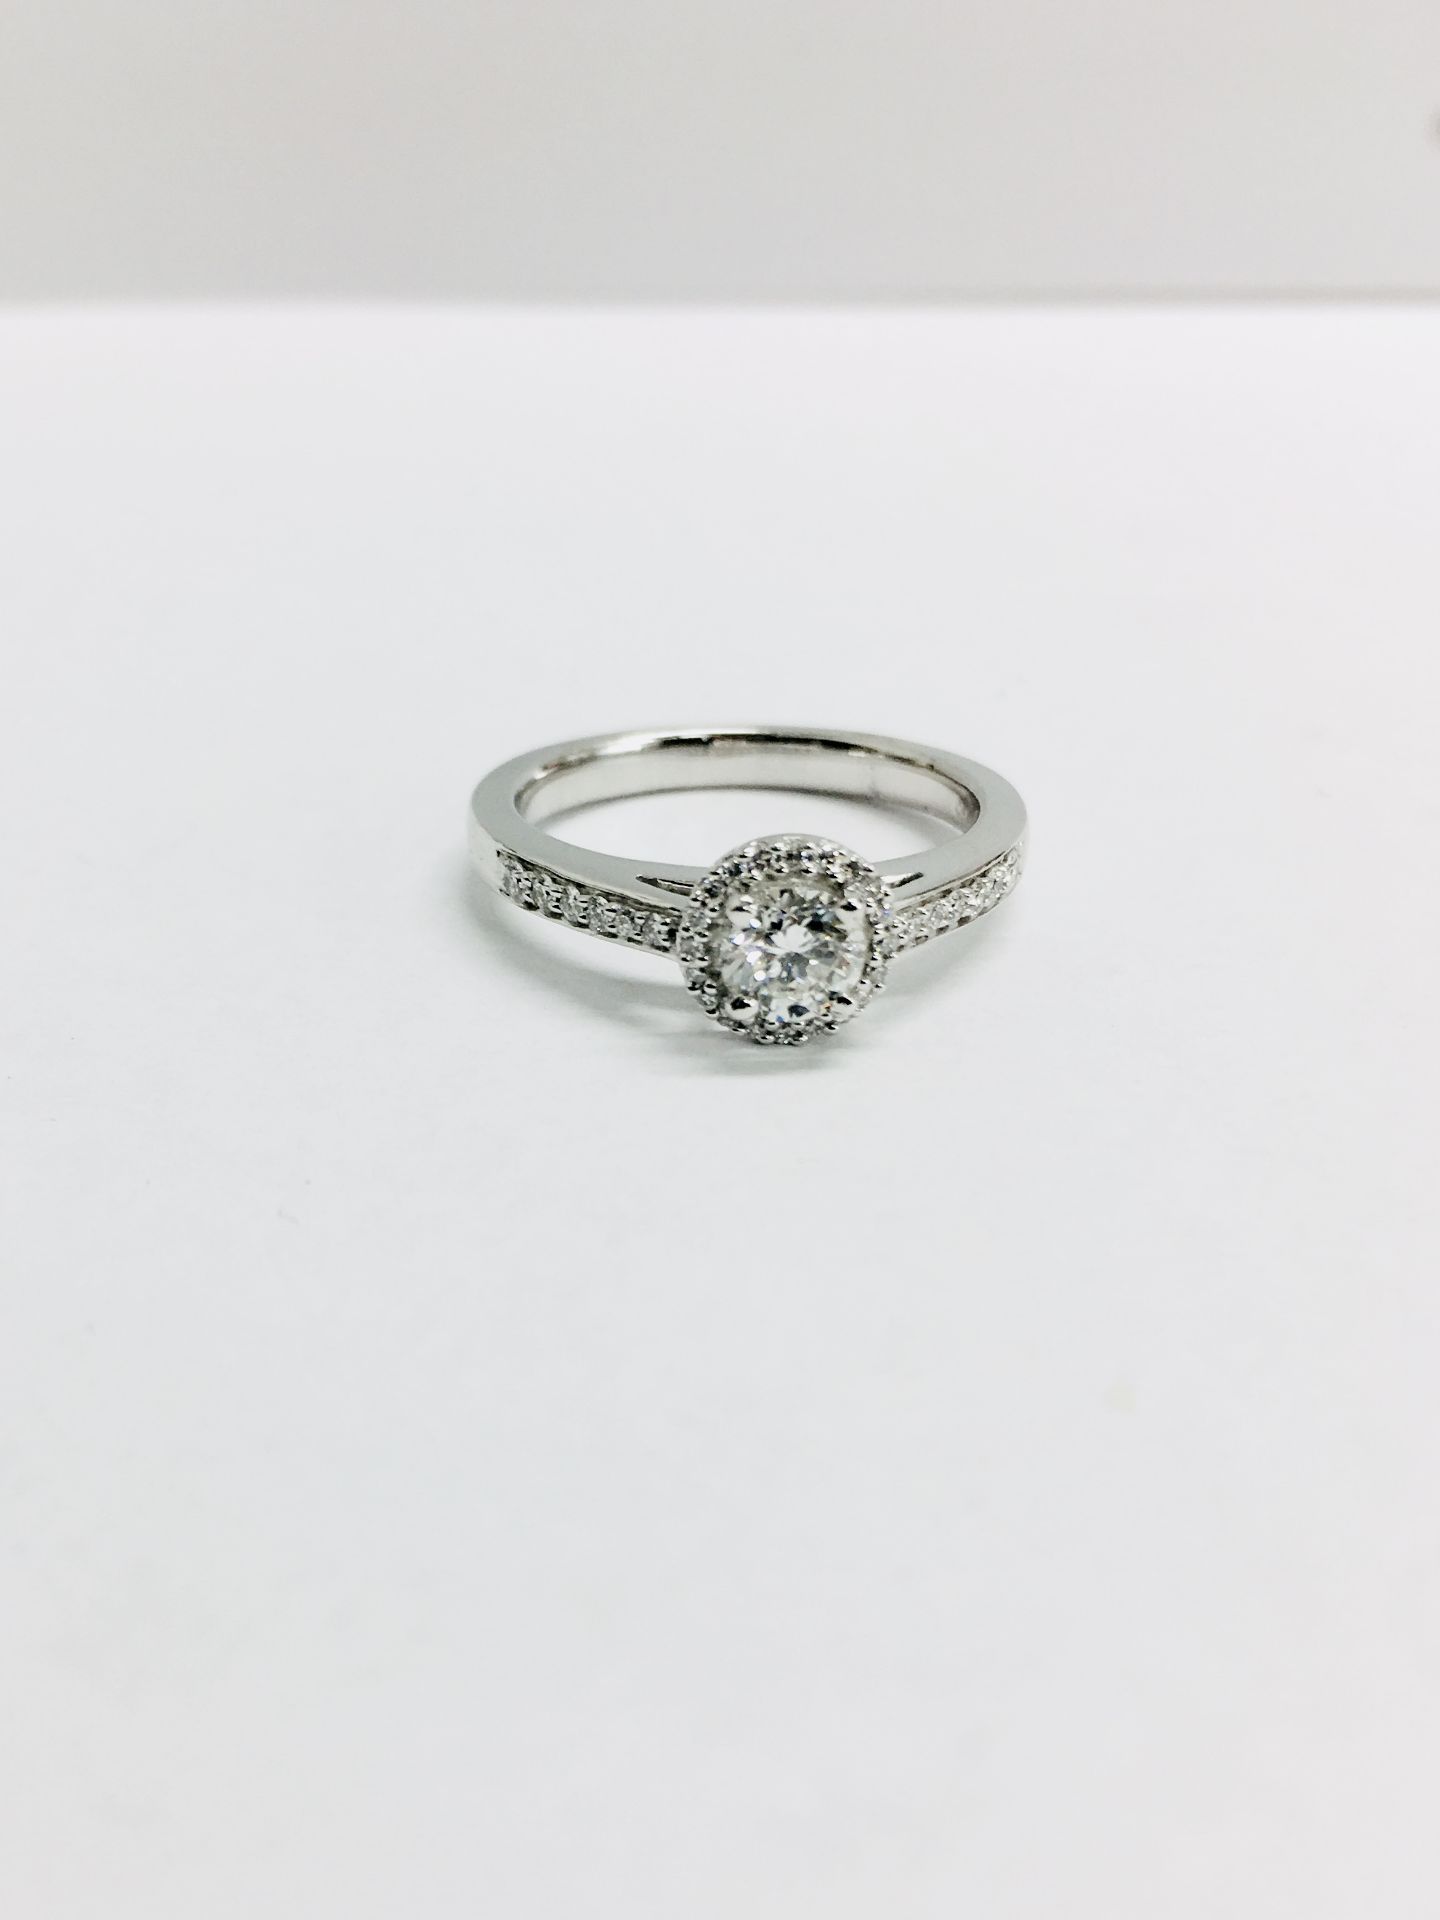 18ct white gold Halo style solitaire ring,0.30ct natural diamond,0.28ct h Colour si diamonds - Image 6 of 6